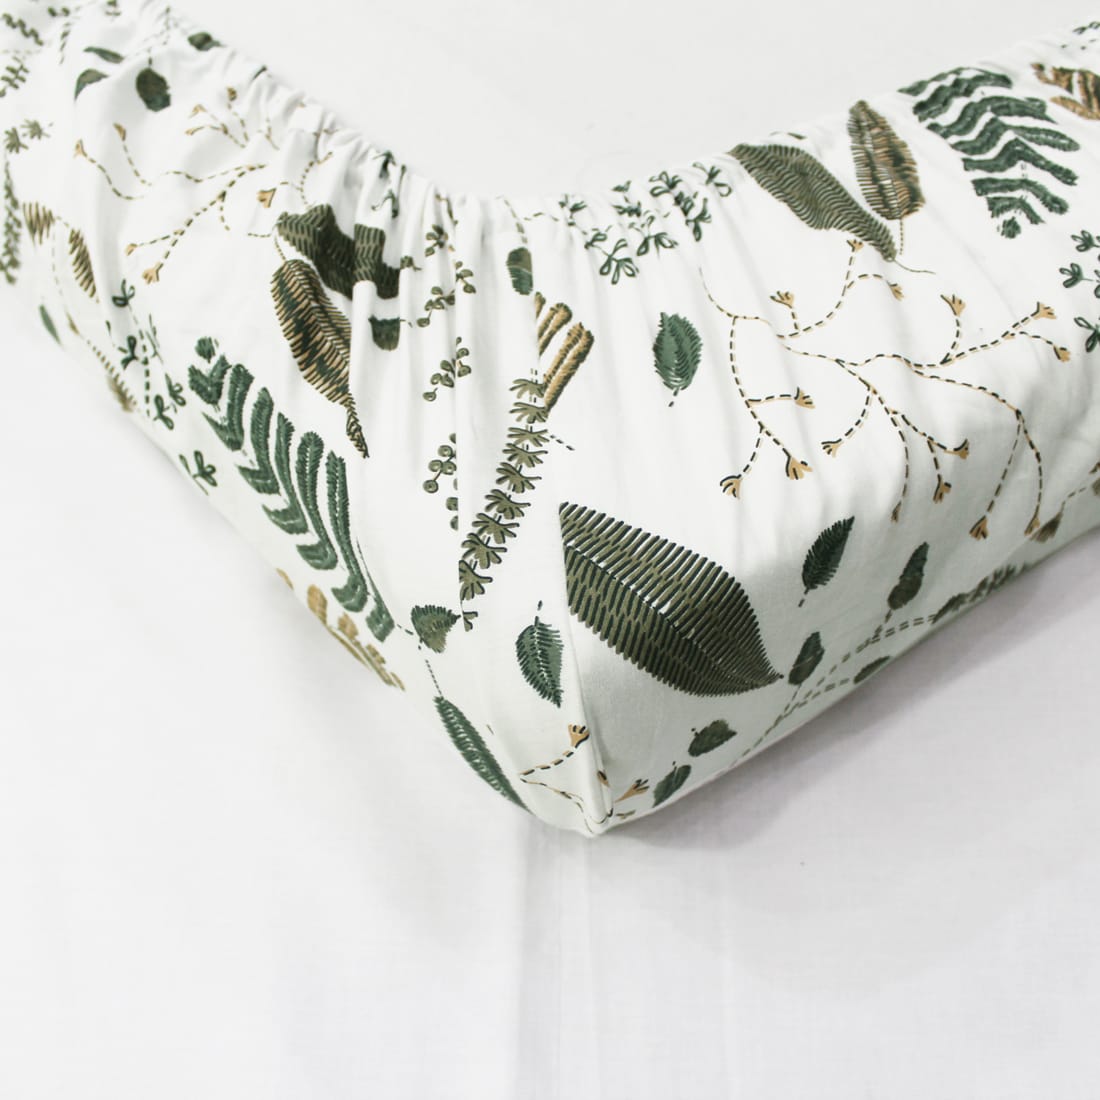 Printed Floral Cotton 250 TC Fitted Bedsheet - Green